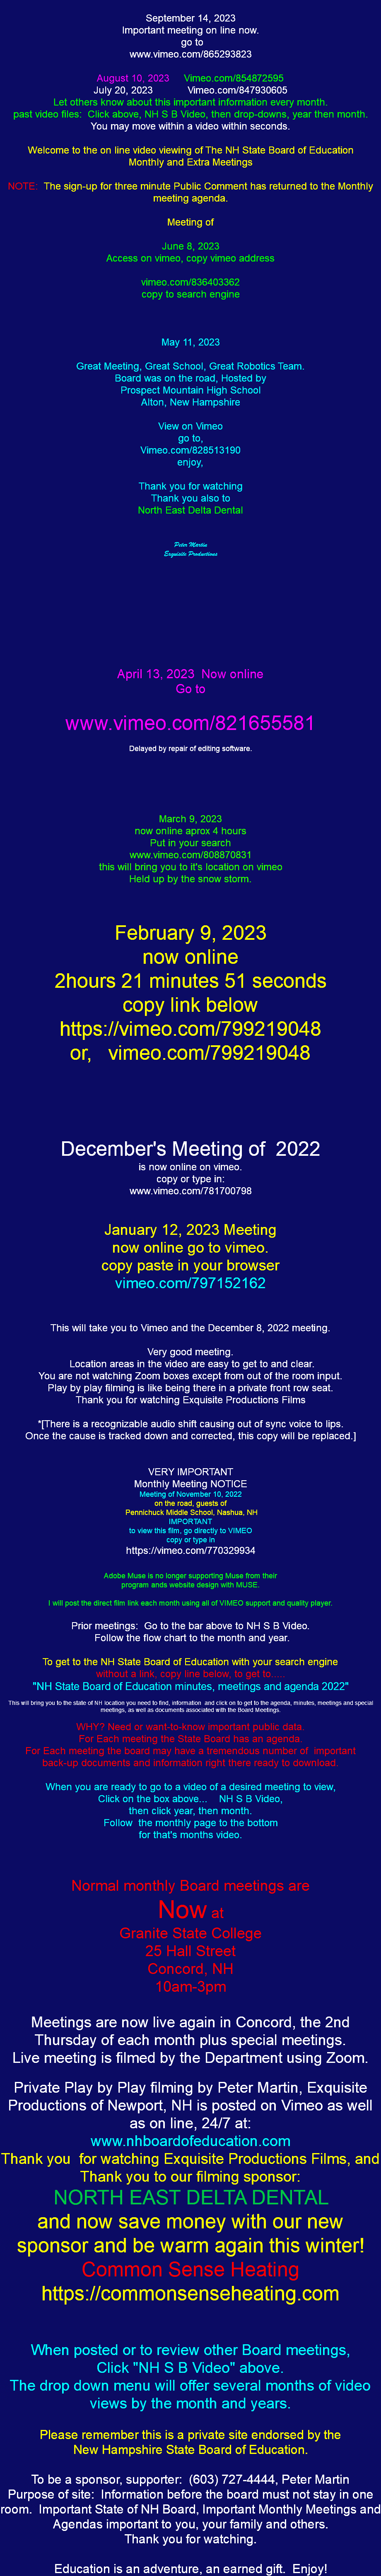  September 14, 2023 Important meeting on line now. go to www.vimeo.com/865293823 August 10, 2023 Vimeo.com/854872595 July 20, 2023 Vimeo.com/847930605 Let others know about this important information every month. past video files: Click above, NH S B Video, then drop-downs, year then month. You may move within a video within seconds. Welcome to the on line video viewing of The NH State Board of Education Monthly and Extra Meetings NOTE: The sign-up for three minute Public Comment has returned to the Monthly meeting agenda. Meeting of June 8, 2023 Access on vimeo, copy vimeo address vimeo.com/836403362 copy to search engine May 11, 2023 Great Meeting, Great School, Great Robotics Team. Board was on the road, Hosted by Prospect Mountain High School Alton, New Hampshire View on Vimeo go to, Vimeo.com/828513190 enjoy, Thank you for watching Thank you also to North East Delta Dental Peter Martin Exquisite Productions April 13, 2023 Now online Go to www.vimeo.com/821655581 Delayed by repair of editing software. March 9, 2023 now online aprox 4 hours Put in your search www.vimeo.com/808870831 this will bring you to it's location on vimeo Held up by the snow storm. February 9, 2023 now online 2hours 21 minutes 51 seconds copy link below https://vimeo.com/799219048 or, vimeo.com/799219048 December's Meeting of 2022 is now online on vimeo. copy or type in: www.vimeo.com/781700798 January 12, 2023 Meeting now online go to vimeo. copy paste in your browser vimeo.com/797152162 This will take you to Vimeo and the December 8, 2022 meeting. Very good meeting. Location areas in the video are easy to get to and clear. You are not watching Zoom boxes except from out of the room input. Play by play filming is like being there in a private front row seat. Thank you for watching Exquisite Productions Films *[There is a recognizable audio shift causing out of sync voice to lips. Once the cause is tracked down and corrected, this copy will be replaced.] VERY IMPORTANT Monthly Meeting NOTICE Meeting of November 10, 2022 on the road, guests of Pennichuck Middle School, Nashua, NH IMPORTANT to view this film, go directly to VIMEO copy or type in https://vimeo.com/770329934 Adobe Muse is no longer supporting Muse from their program ands website design with MUSE. I will post the direct film link each month using all of VIMEO support and quality player. Prior meetings: Go to the bar above to NH S B Video. Follow the flow chart to the month and year. To get to the NH State Board of Education with your search engine without a link, copy line below, to get to..... "NH State Board of Education minutes, meetings and agenda 2022" This will bring you to the state of NH location you need to find, information and click on to get to the agenda, minutes, meetings and special meetings, as well as documents associated with the Board Meetings. WHY? Need or want-to-know important public data. For Each meeting the State Board has an agenda. For Each meeting the board may have a tremendous number of important back-up documents and information right there ready to download. When you are ready to go to a video of a desired meeting to view, Click on the box above... NH S B Video, then click year, then month. Follow the monthly page to the bottom for that's months video. Normal monthly Board meetings are Now at Granite State College 25 Hall Street Concord, NH 10am-3pm Meetings are now live again in Concord, the 2nd Thursday of each month plus special meetings. Live meeting is filmed by the Department using Zoom. Private Play by Play filming by Peter Martin, Exquisite Productions of Newport, NH is posted on Vimeo as well as on line, 24/7 at: www.nhboardofeducation.com Thank you for watching Exquisite Productions Films, and Thank you to our filming sponsor: NORTH EAST DELTA DENTAL and now save money with our new sponsor and be warm again this winter! Common Sense Heating https://commonsenseheating.com When posted or to review other Board meetings, Click "NH S B Video" above. The drop down menu will offer several months of video views by the month and years. Please remember this is a private site endorsed by the New Hampshire State Board of Education. To be a sponsor, supporter: (603) 727-4444, Peter Martin Purpose of site: Information before the board must not stay in one room. Important State of NH Board, Important Monthly Meetings and Agendas important to you, your family and others. Thank you for watching. Education is an adventure, an earned gift. Enjoy!